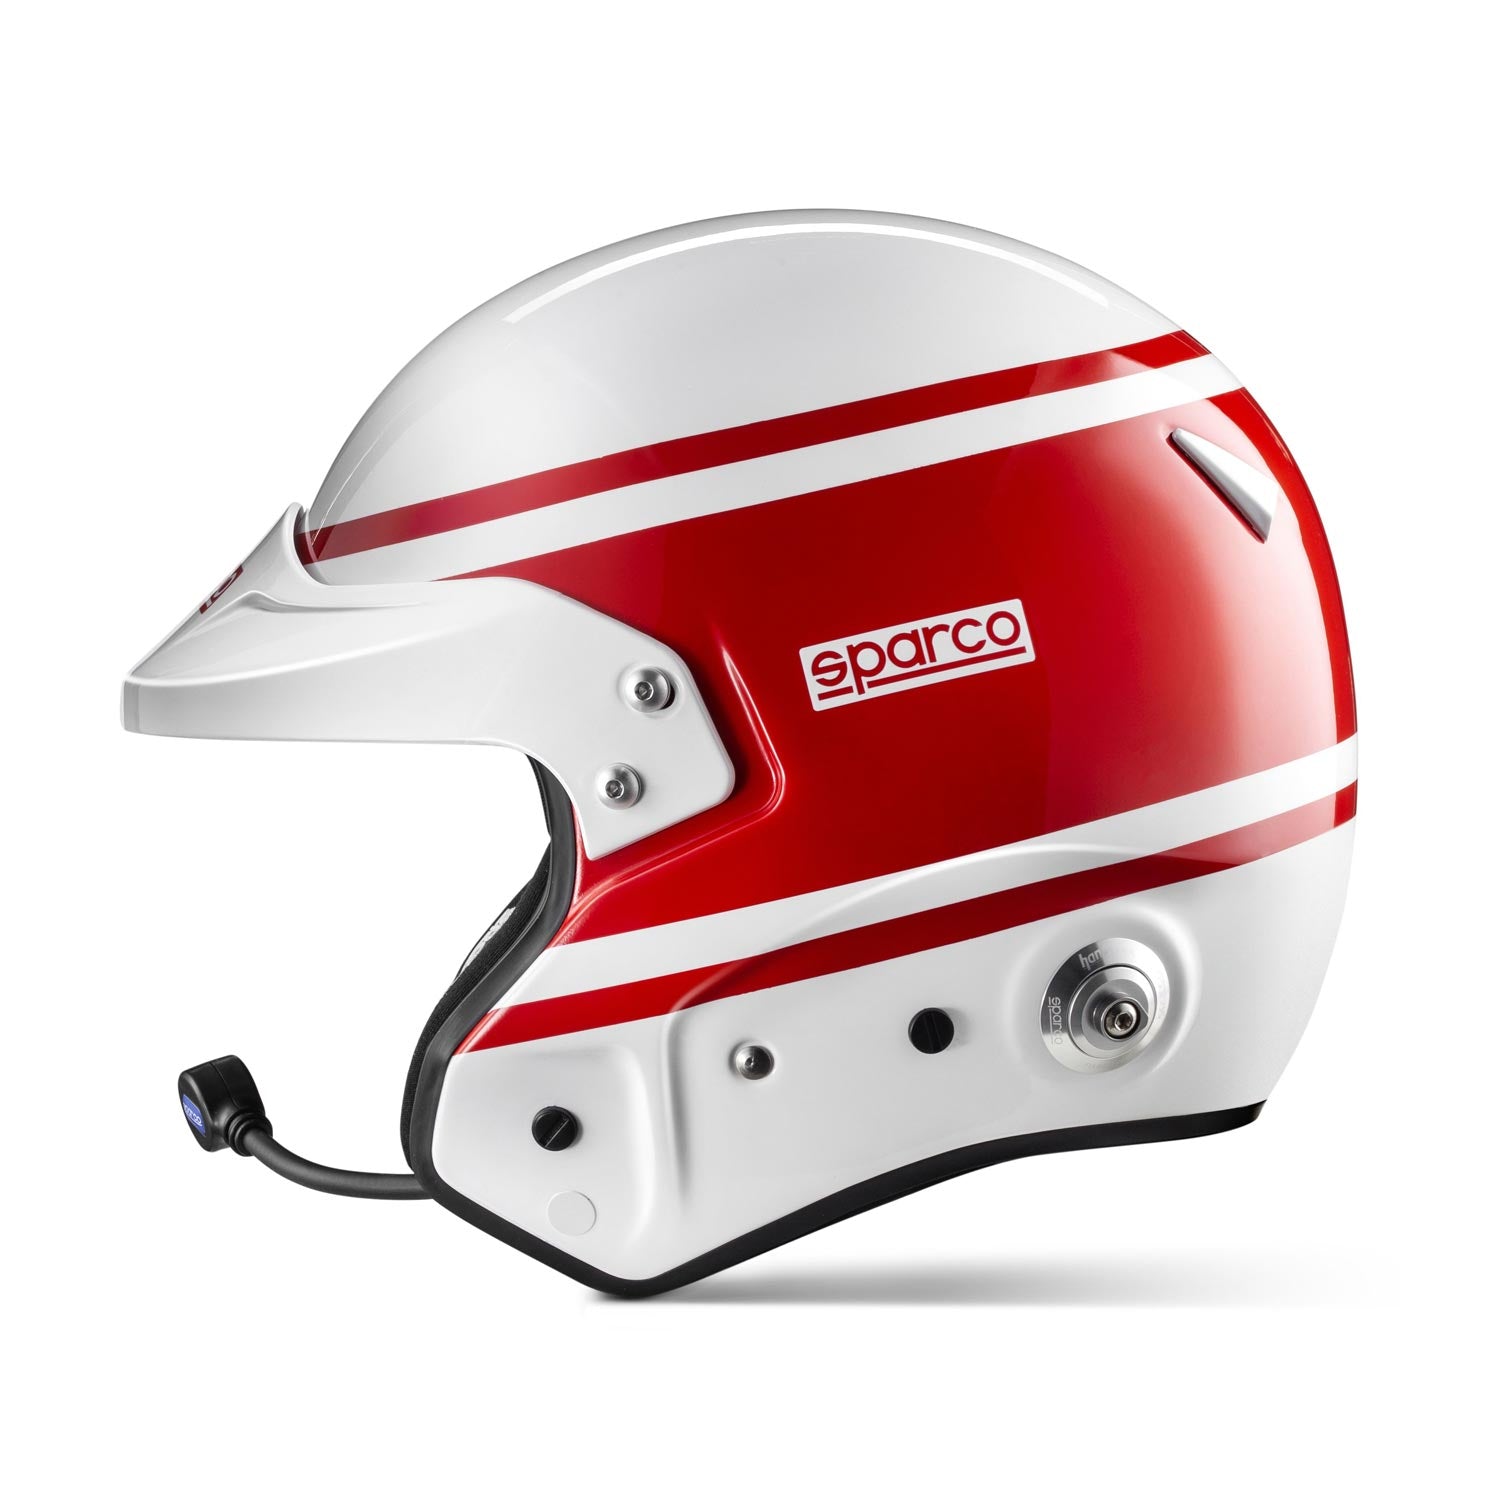 SPARCO 003369RS5XL RJ-i 1977 Racing helmet open-face, FIA/SNELL SA2020, red/white, size XL (61) Photo-1 